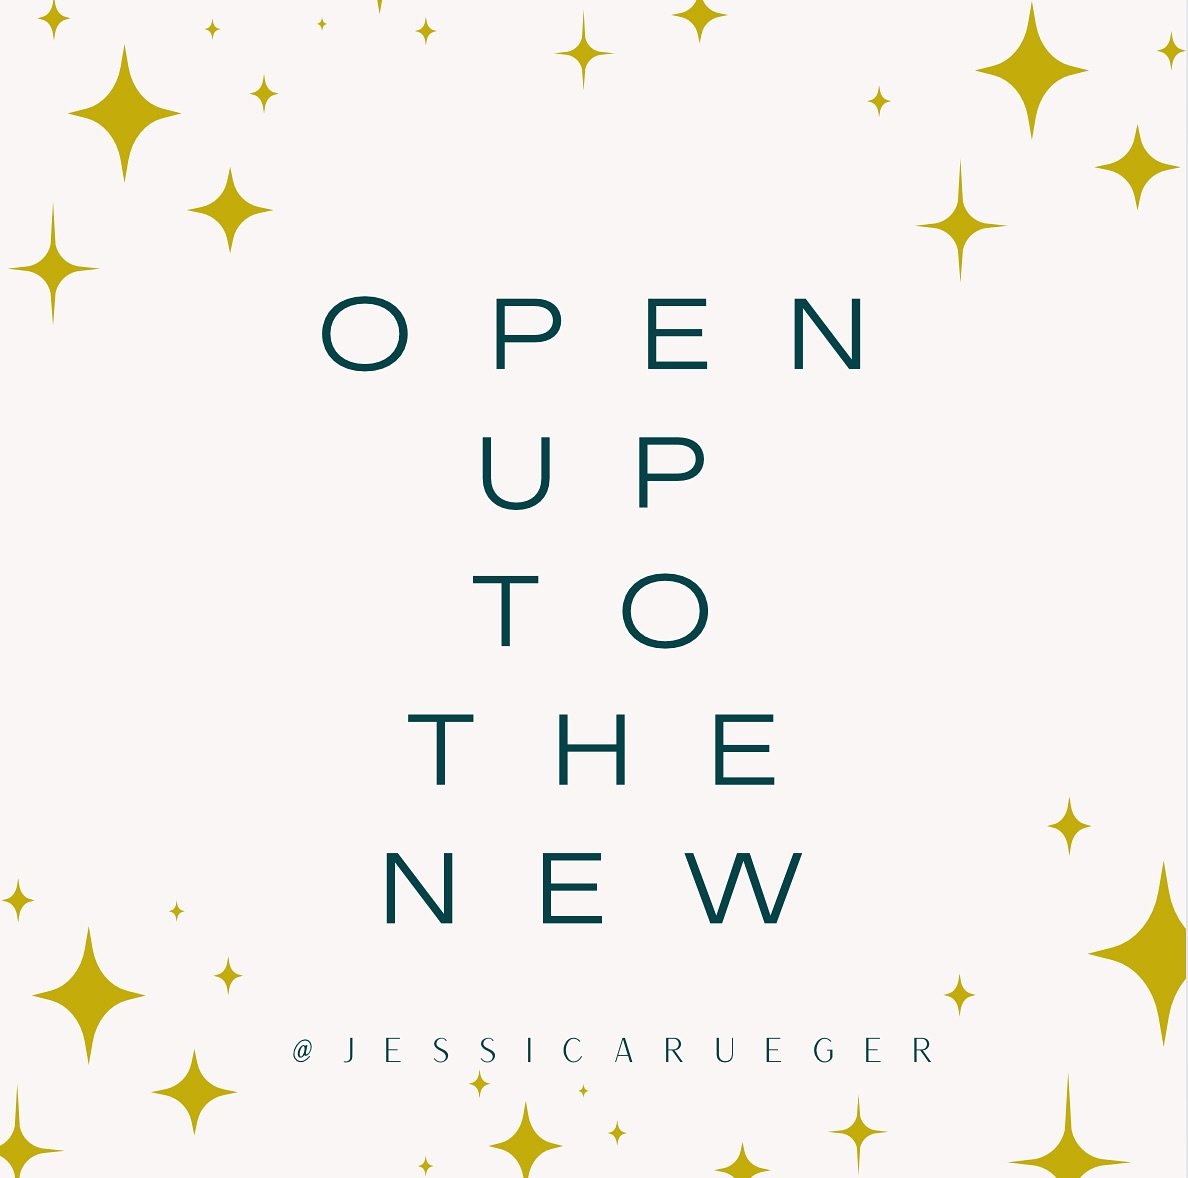 Be with the new
Breathe with the new
Get curious about the new
Welcome the new
Let the new moment seduce you&hellip;
Experience the newness of now

Open to the new